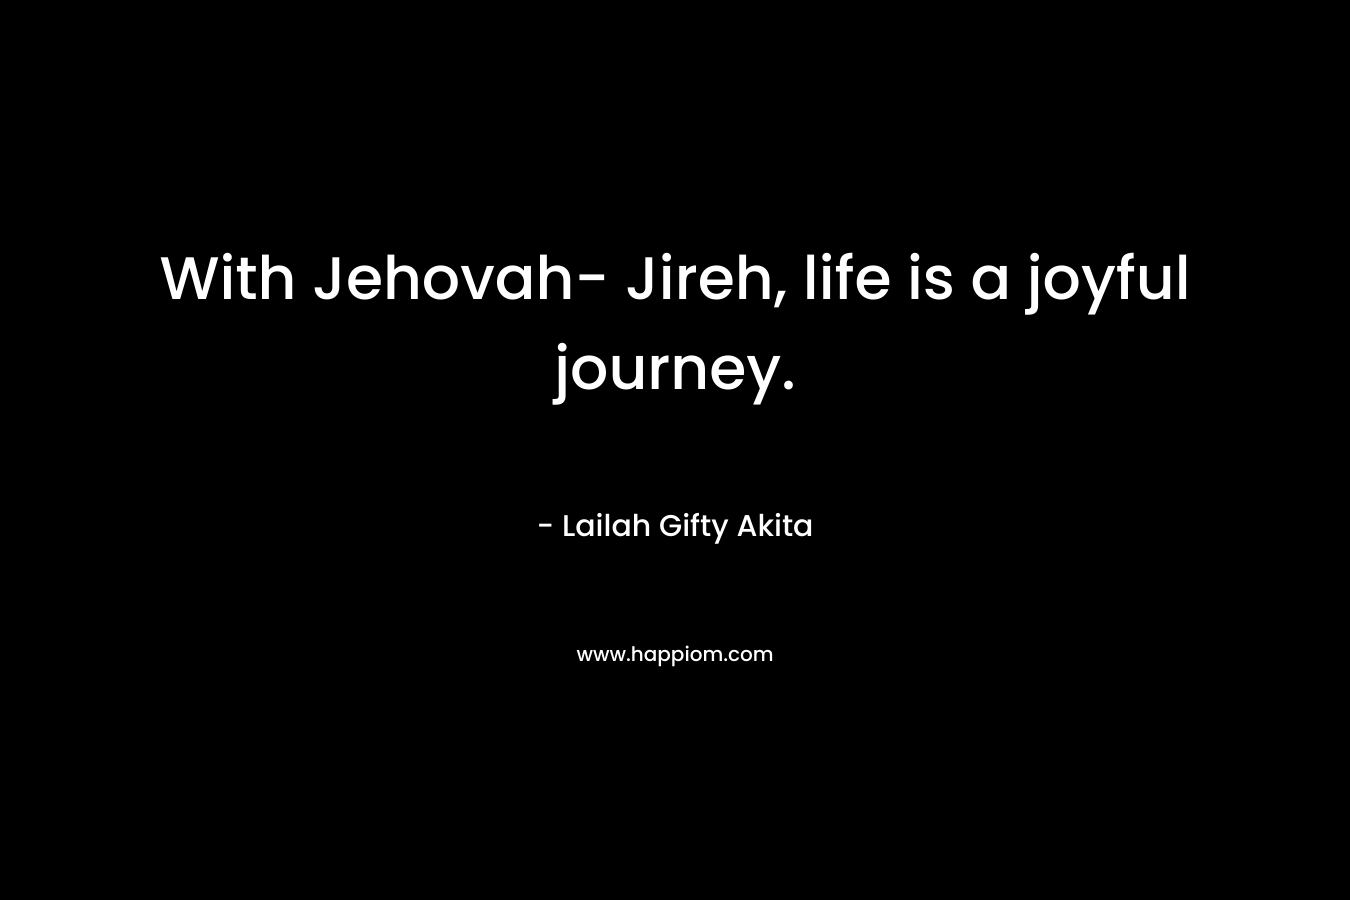 With Jehovah- Jireh, life is a joyful journey.